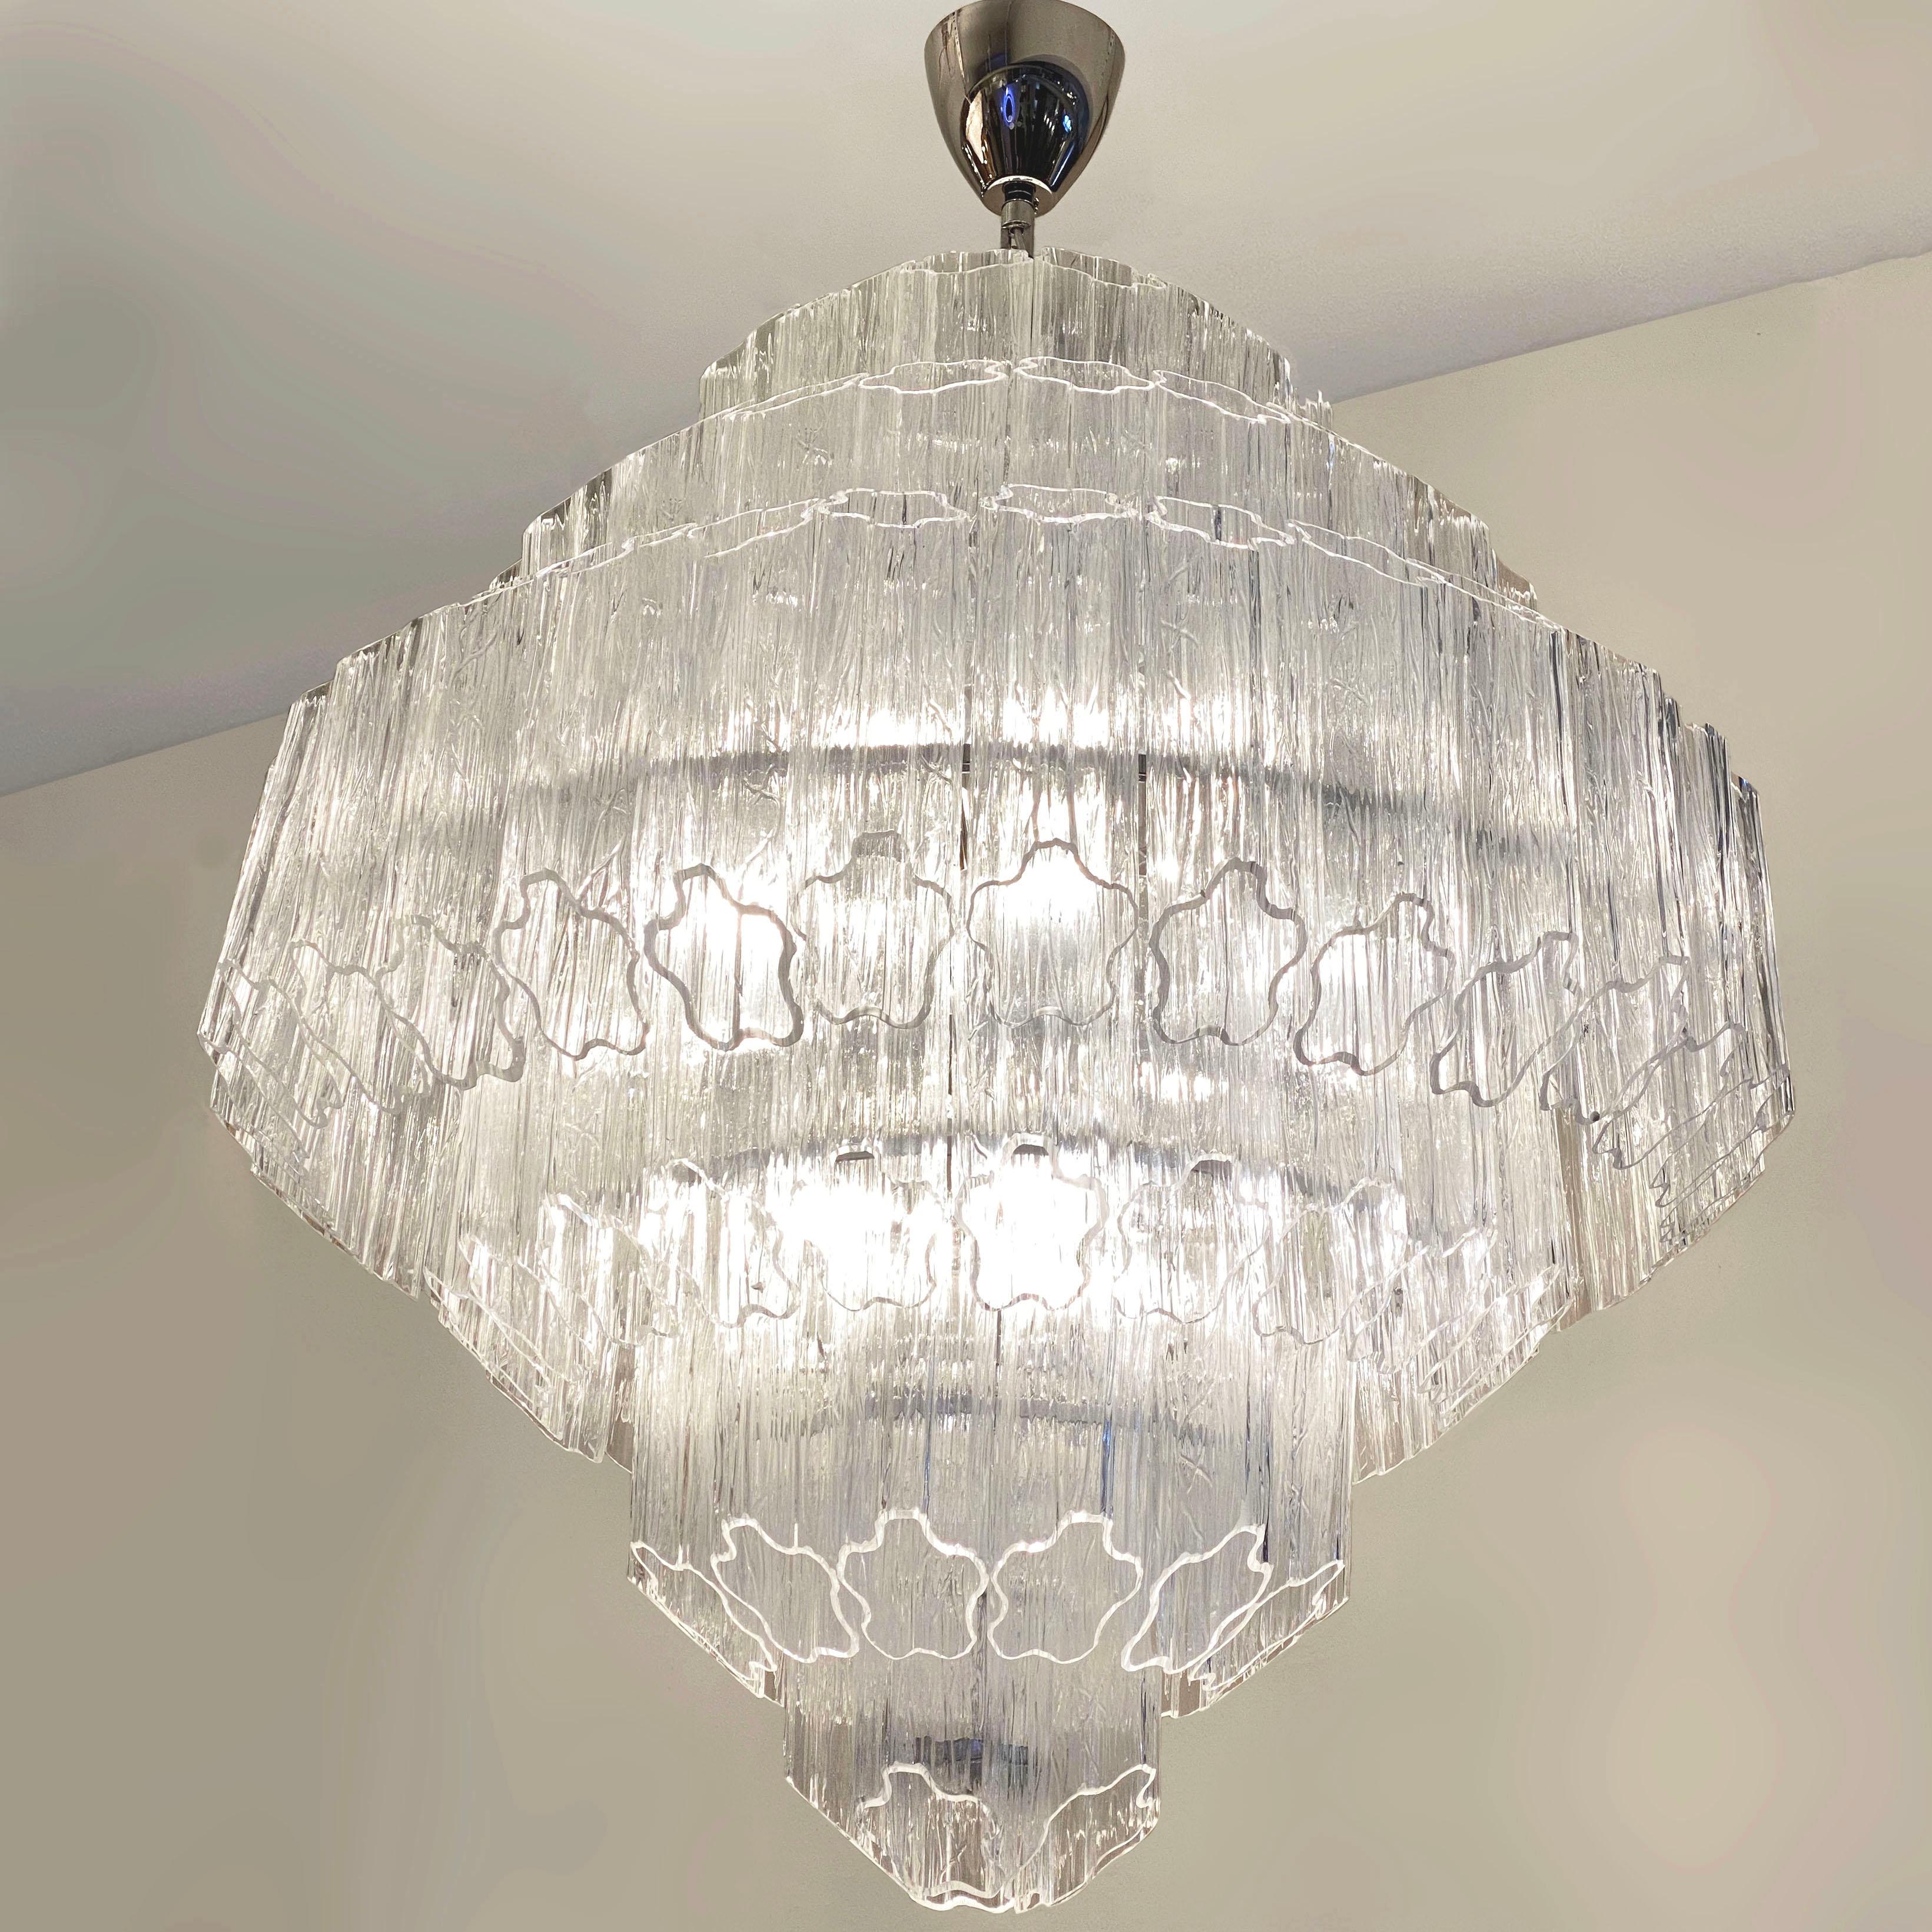 Bespoke Italian Art Deco Design Crystal Murano Glass Nickel Modern Chandelier In New Condition For Sale In New York, NY